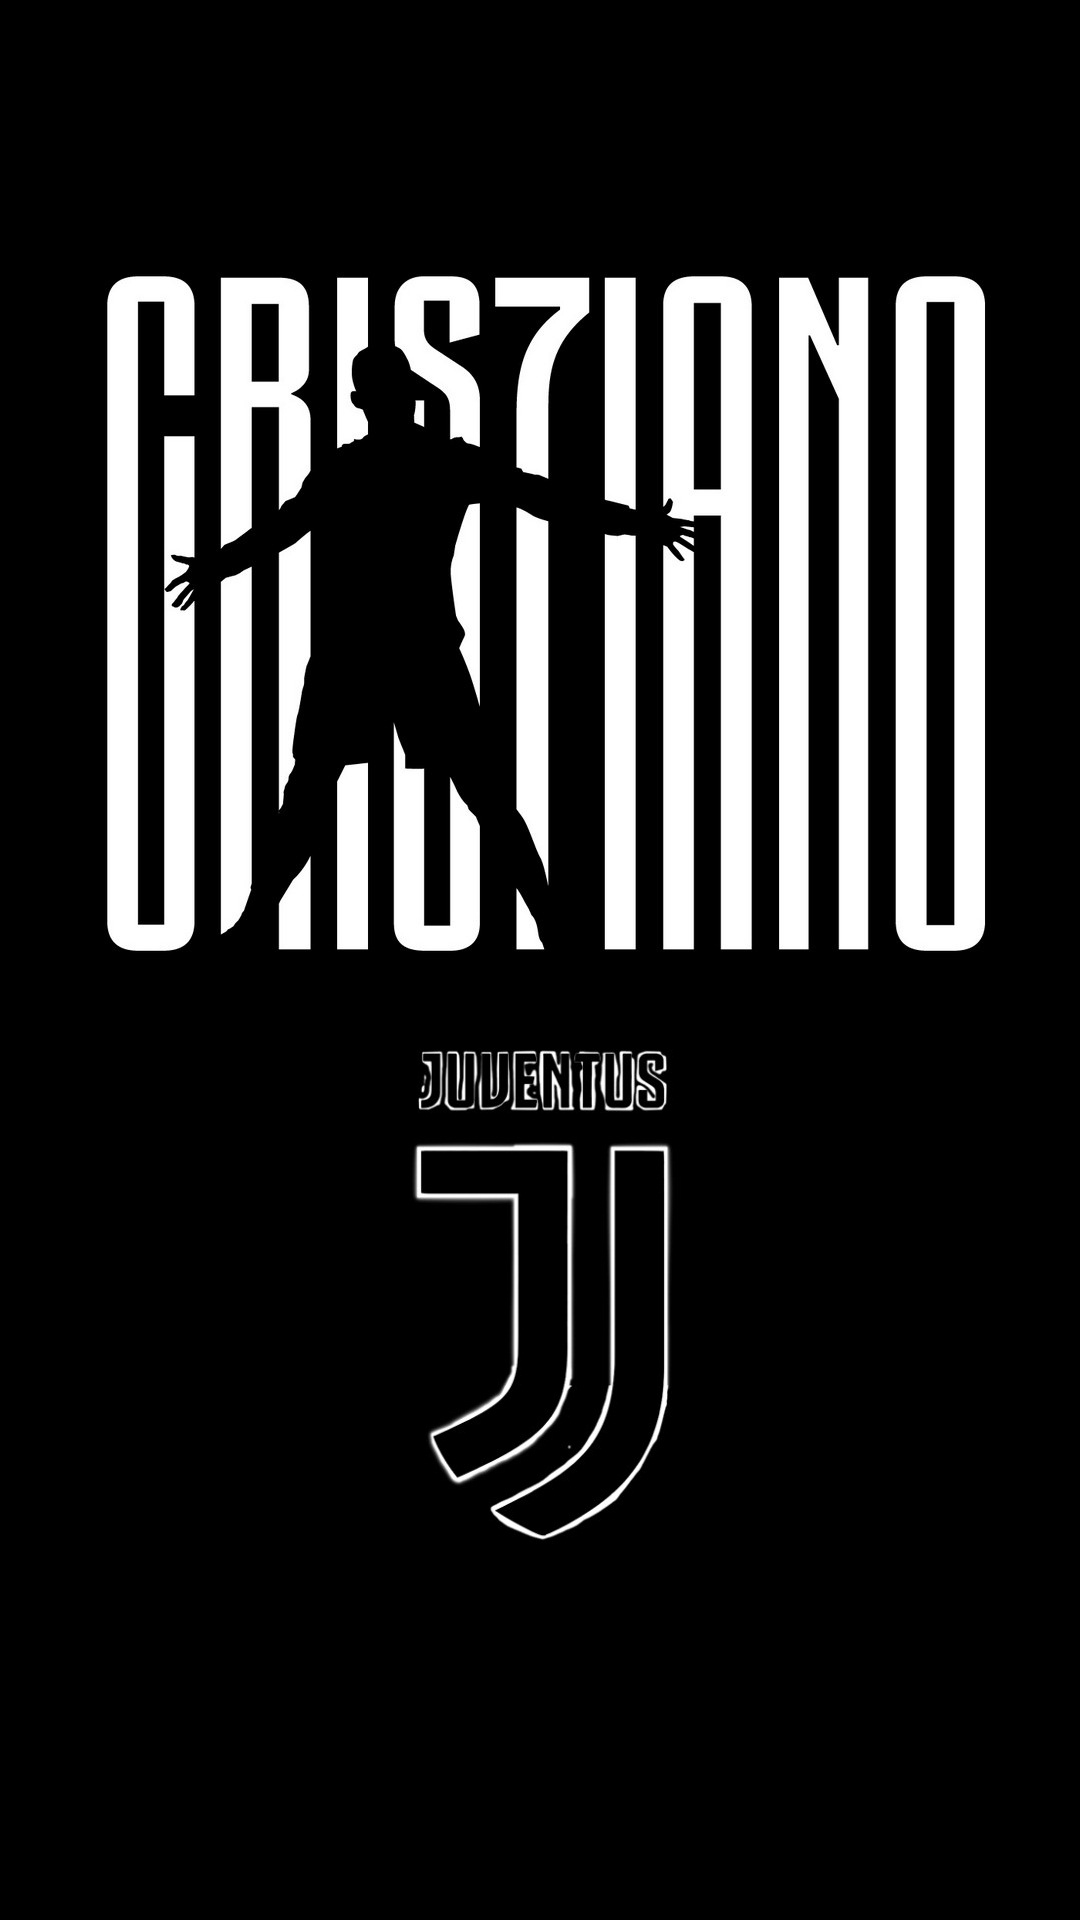 iPhone X Wallpaper C Ronaldo Juventus with resolution 1080X1920 pixel. You can make this wallpaper for your iPhone 5, 6, 7, 8, X backgrounds, Mobile Screensaver, or iPad Lock Screen